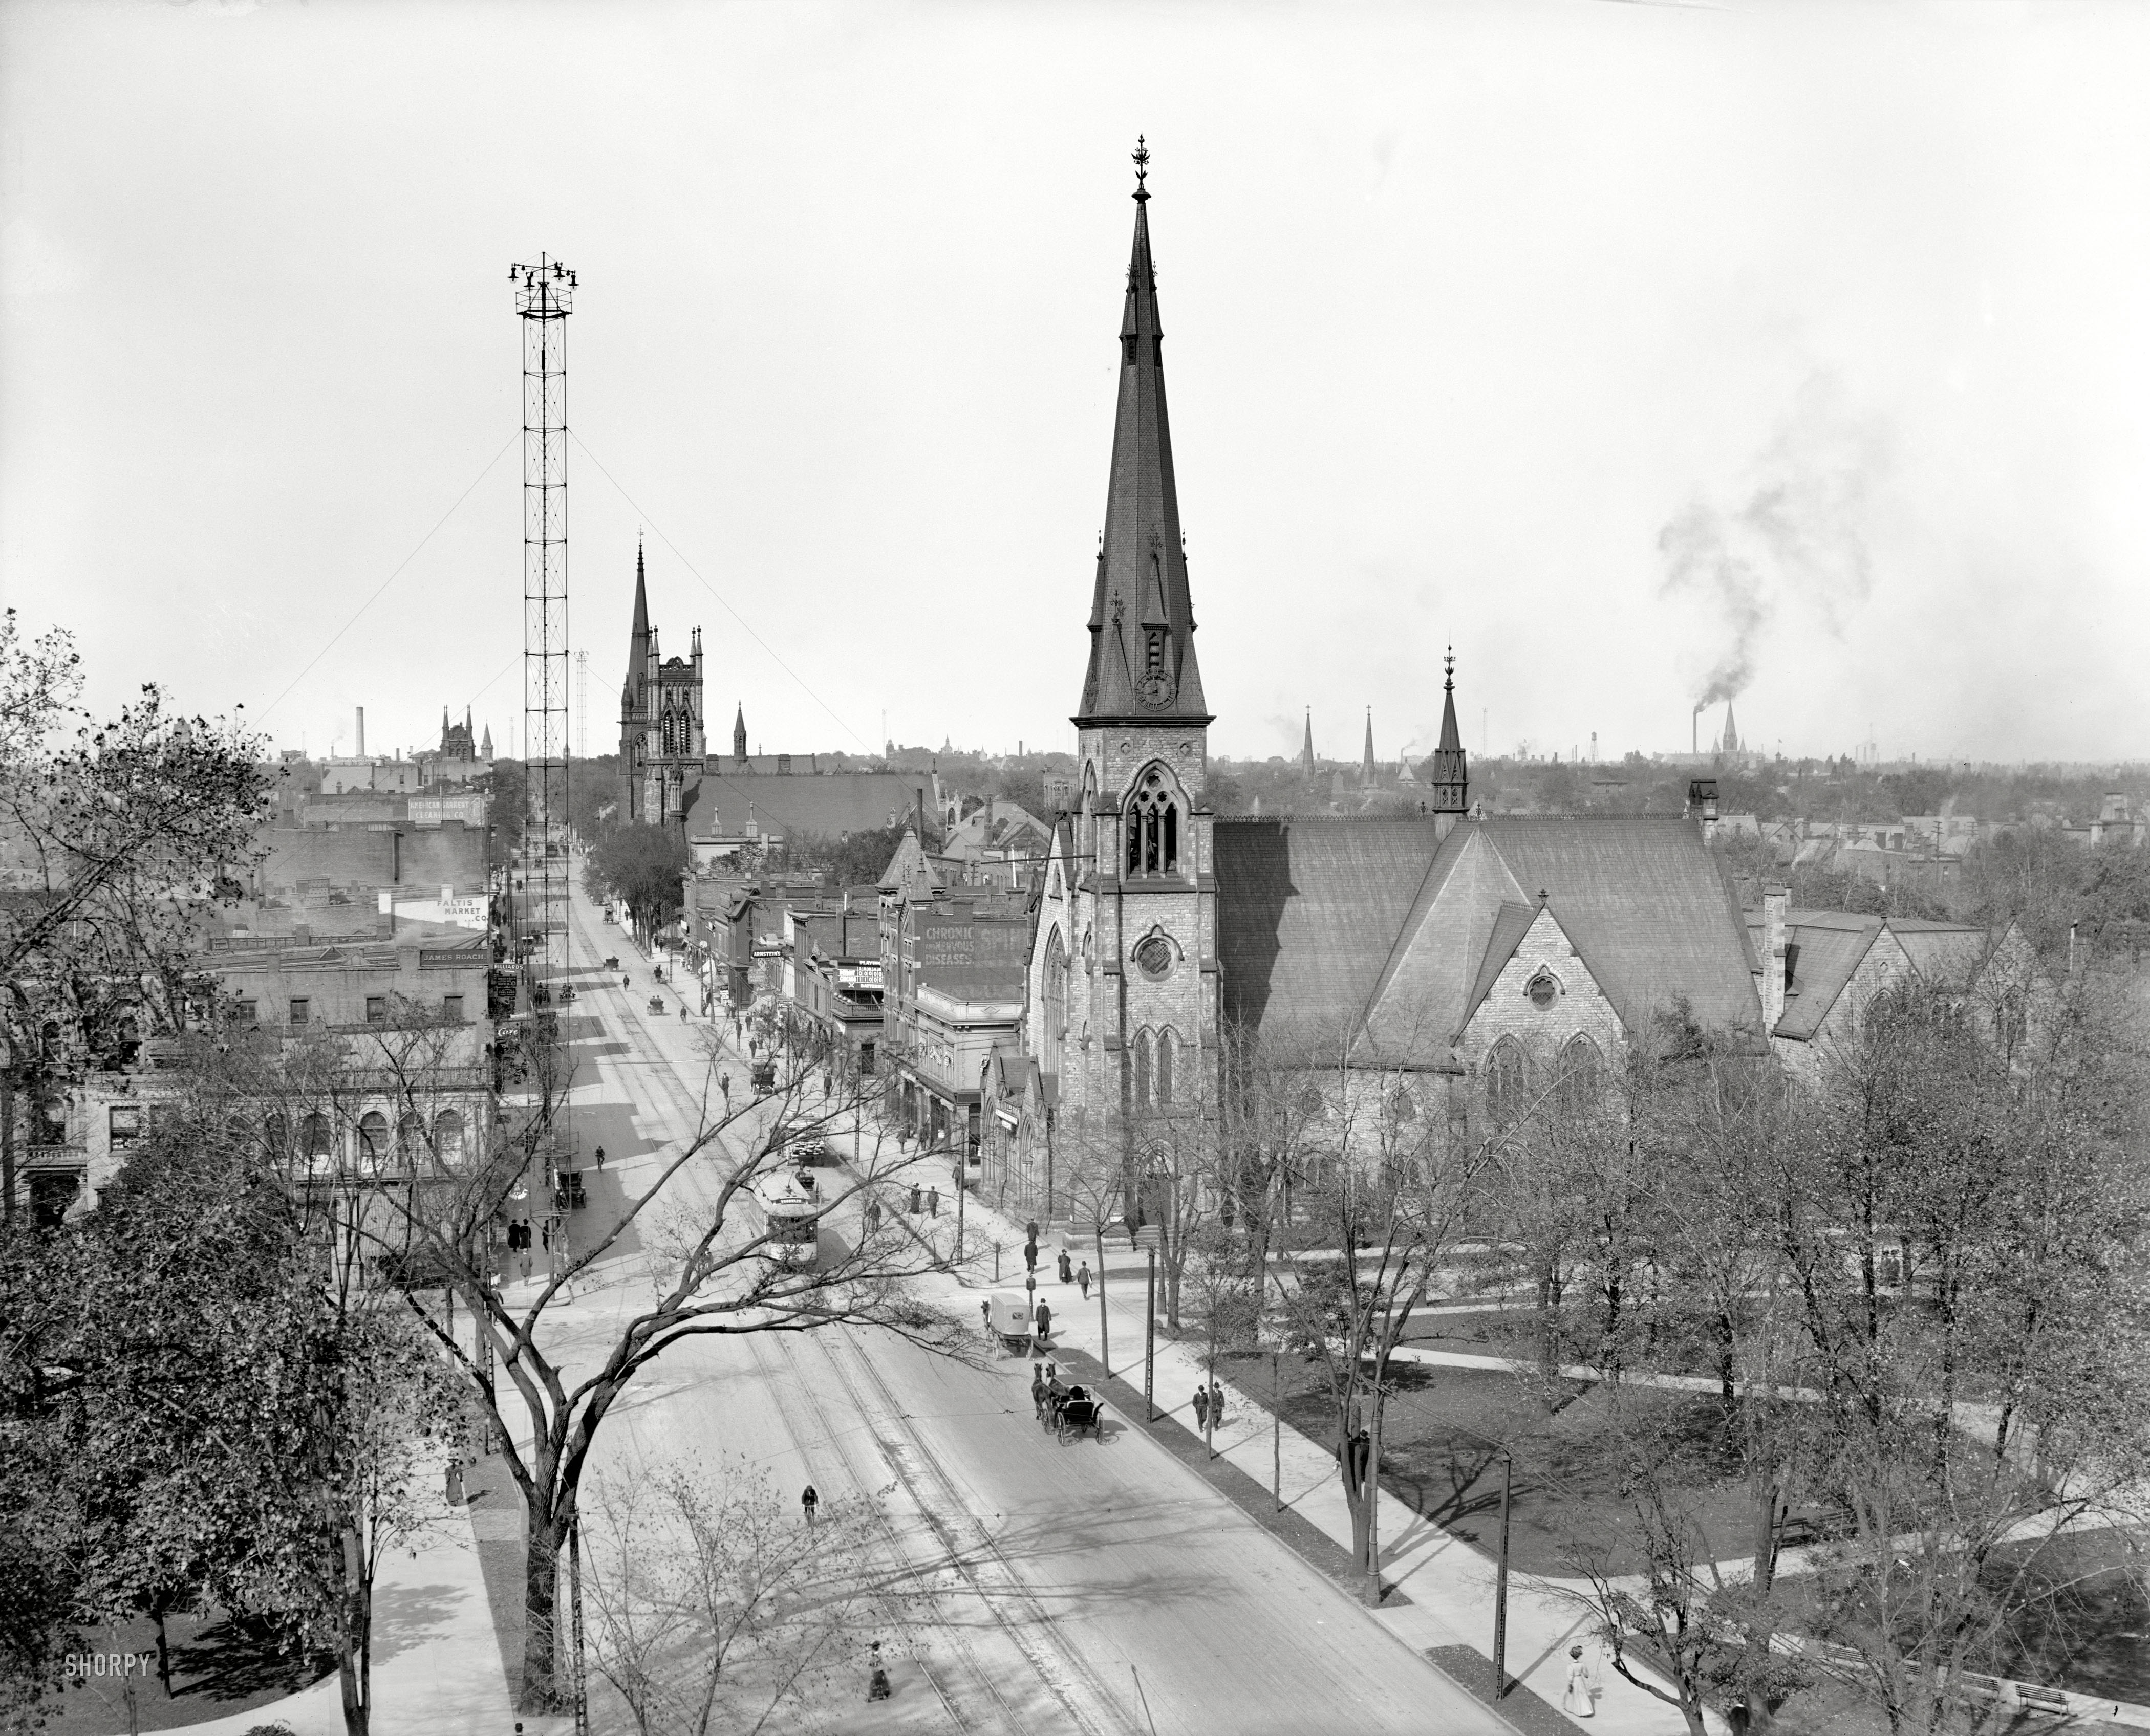 Detroit circa 1908. "Up Woodward Avenue from Grand Circus Park." A record number of "moonlight tower" arc lamp standards on view here. 8x10 inch dry plate glass negative, Detroit Publishing Company. View full size.